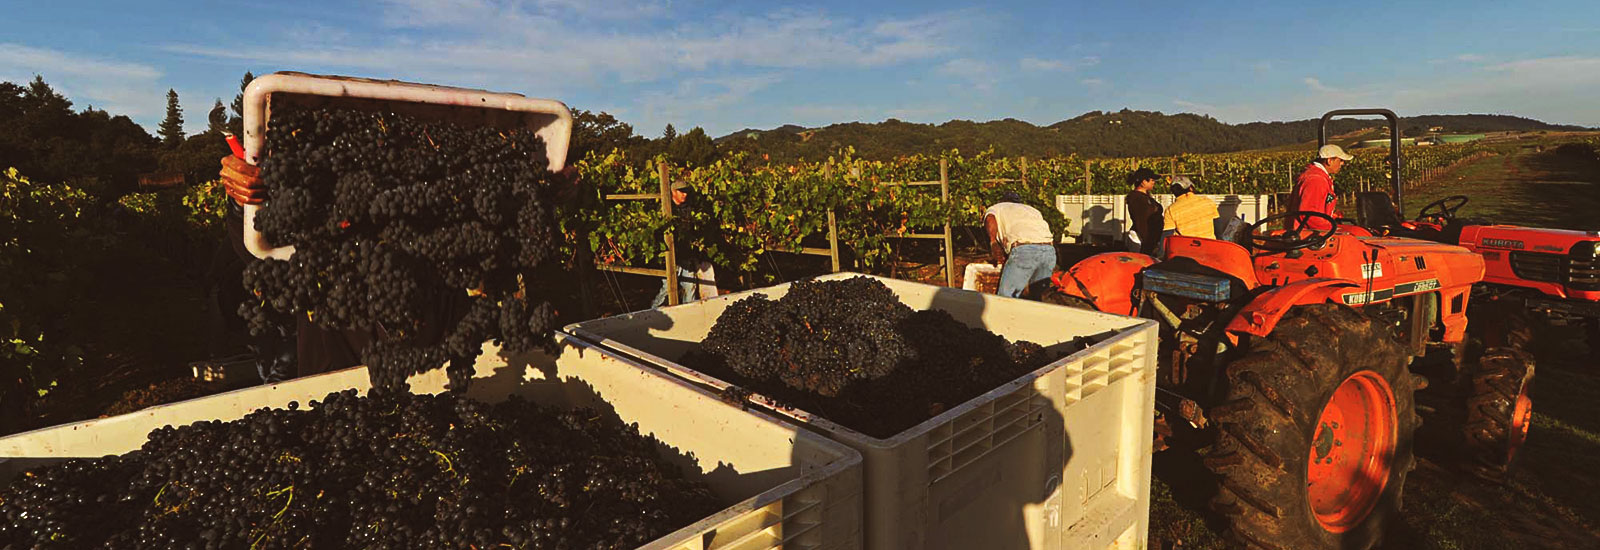 Hendry vineyard crew dumping grapes into bin at harvest time